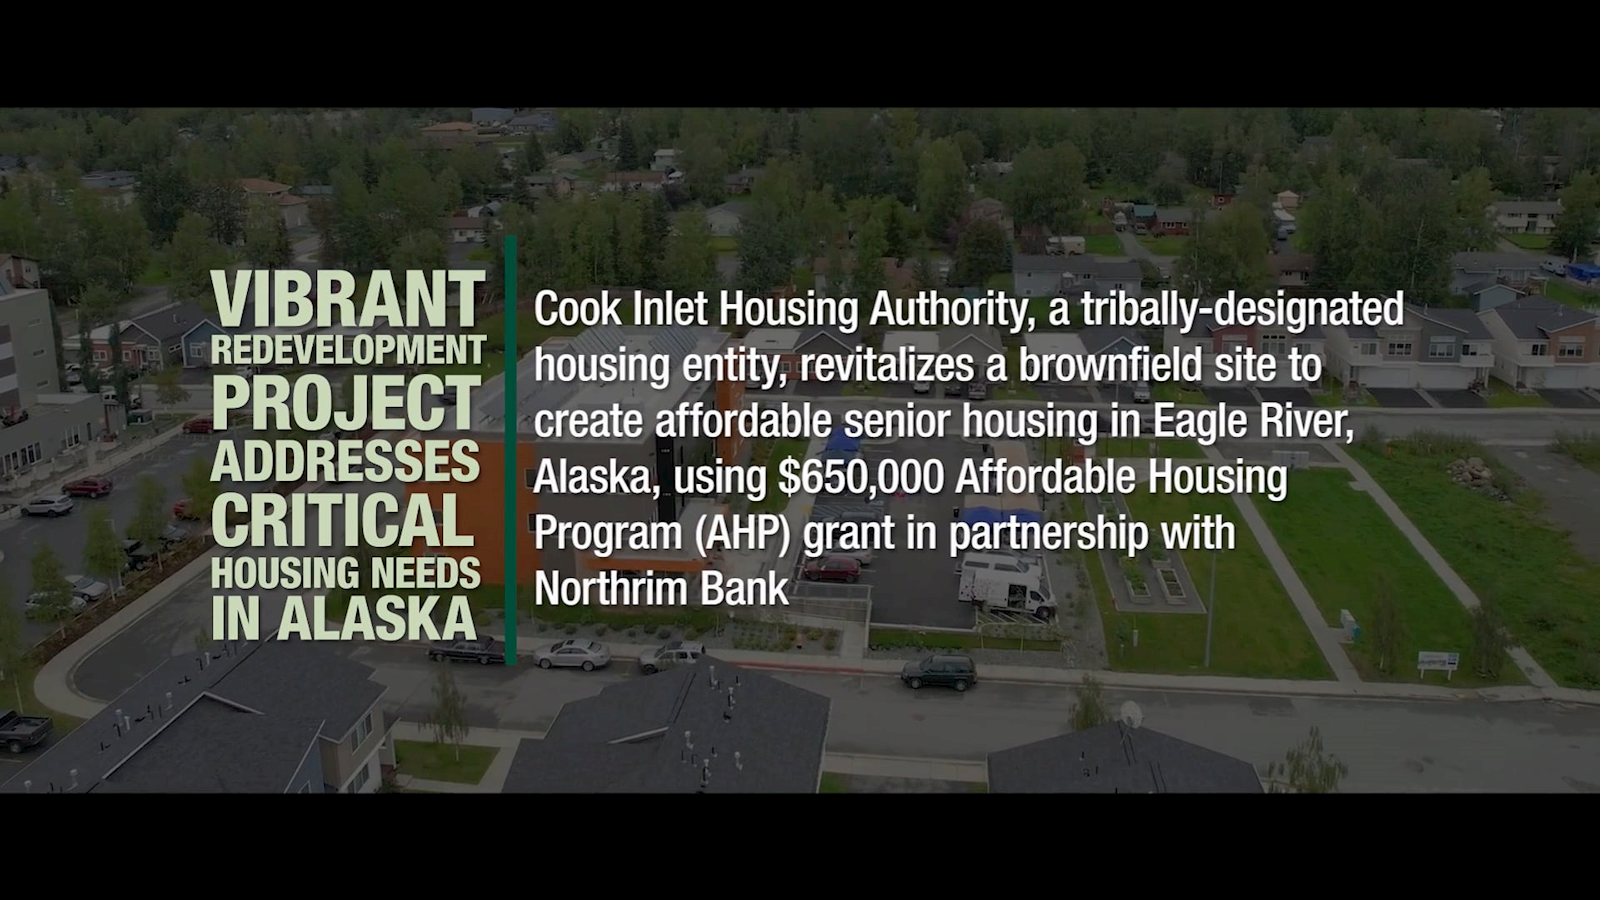 Affordable Housing Project Addresses Critical Housing Needs in Alaska